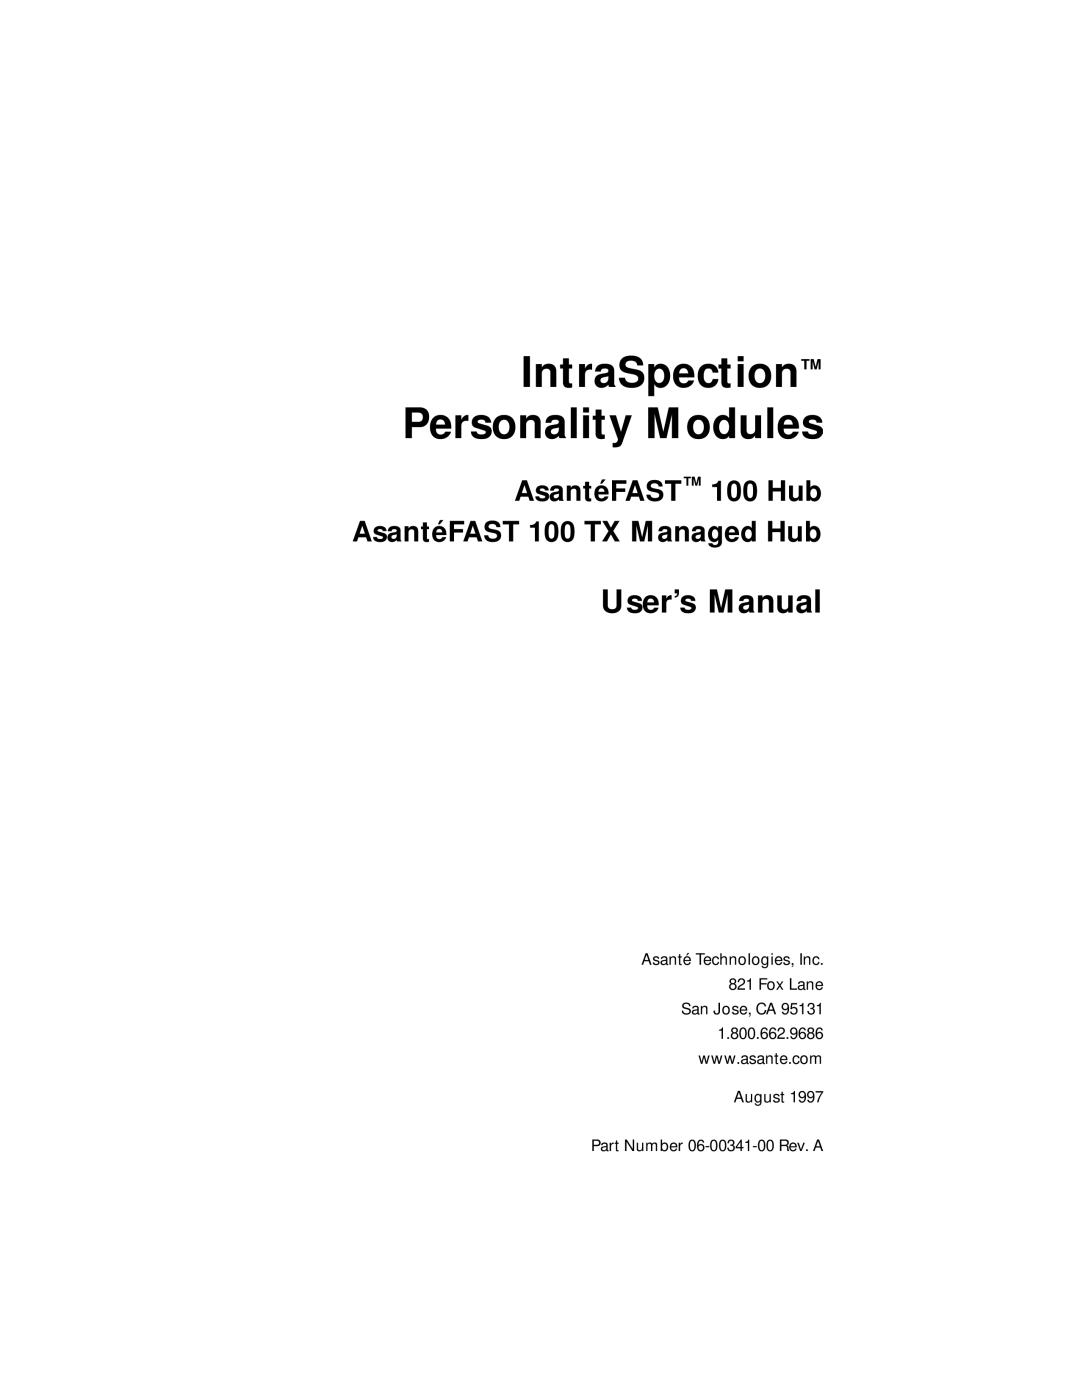 Asante Technologies 100TX user manual IntraSpection Personality Modules, User’s Manual, August 